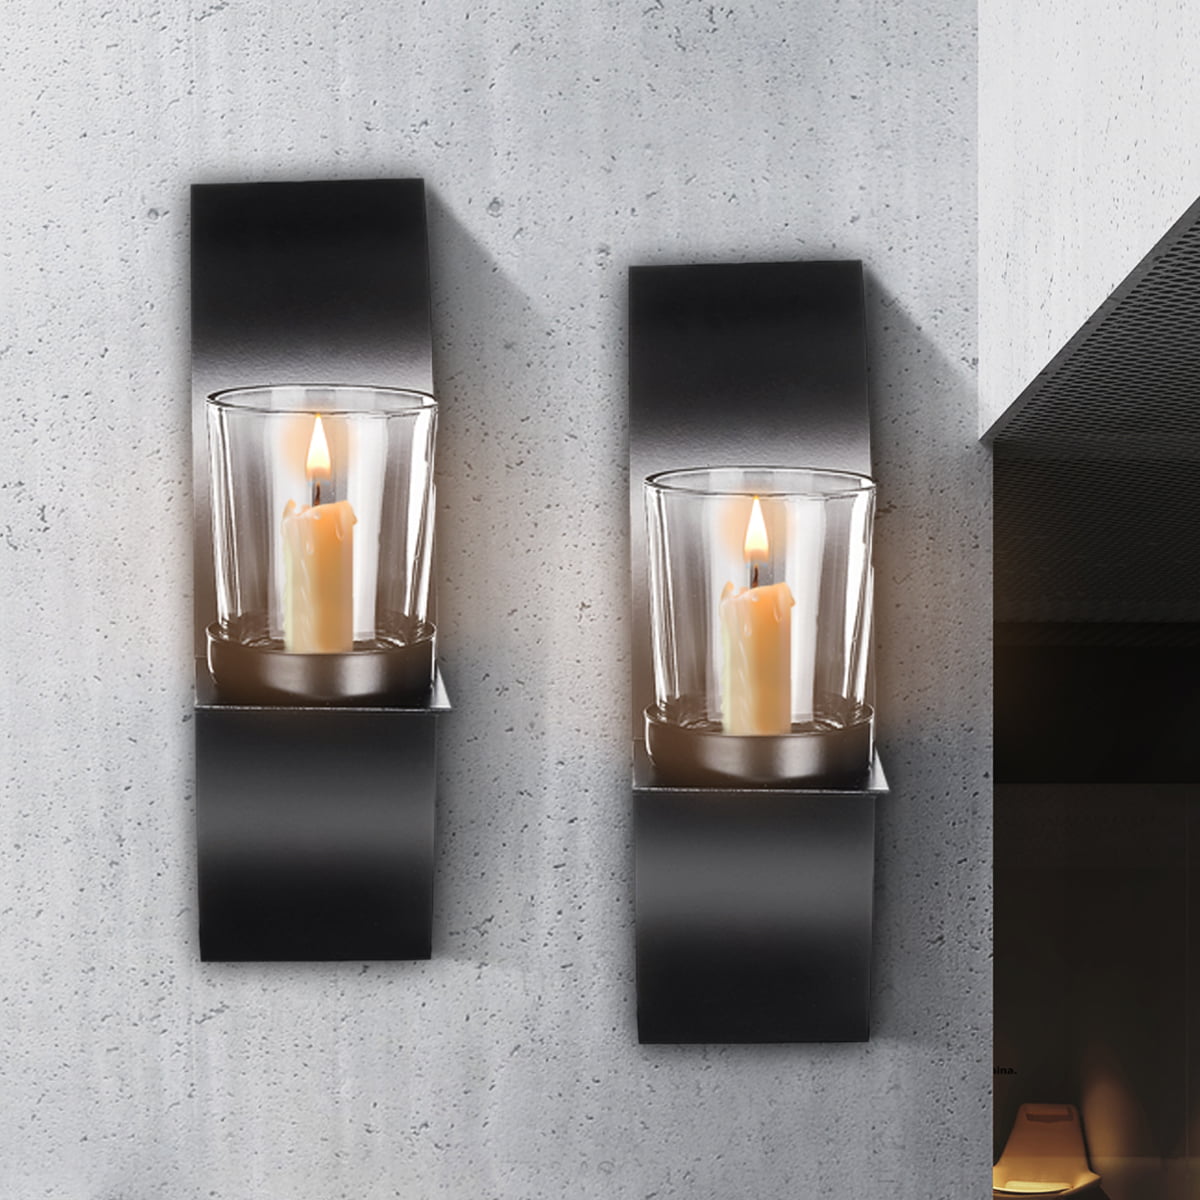 1 Black+1 Gold MKOIJN Metal Wall Candle Holder Decor Wall Mounted Candle Sconces Holders with Glass Candle Sconces Holder for Wall Home Wall Art 